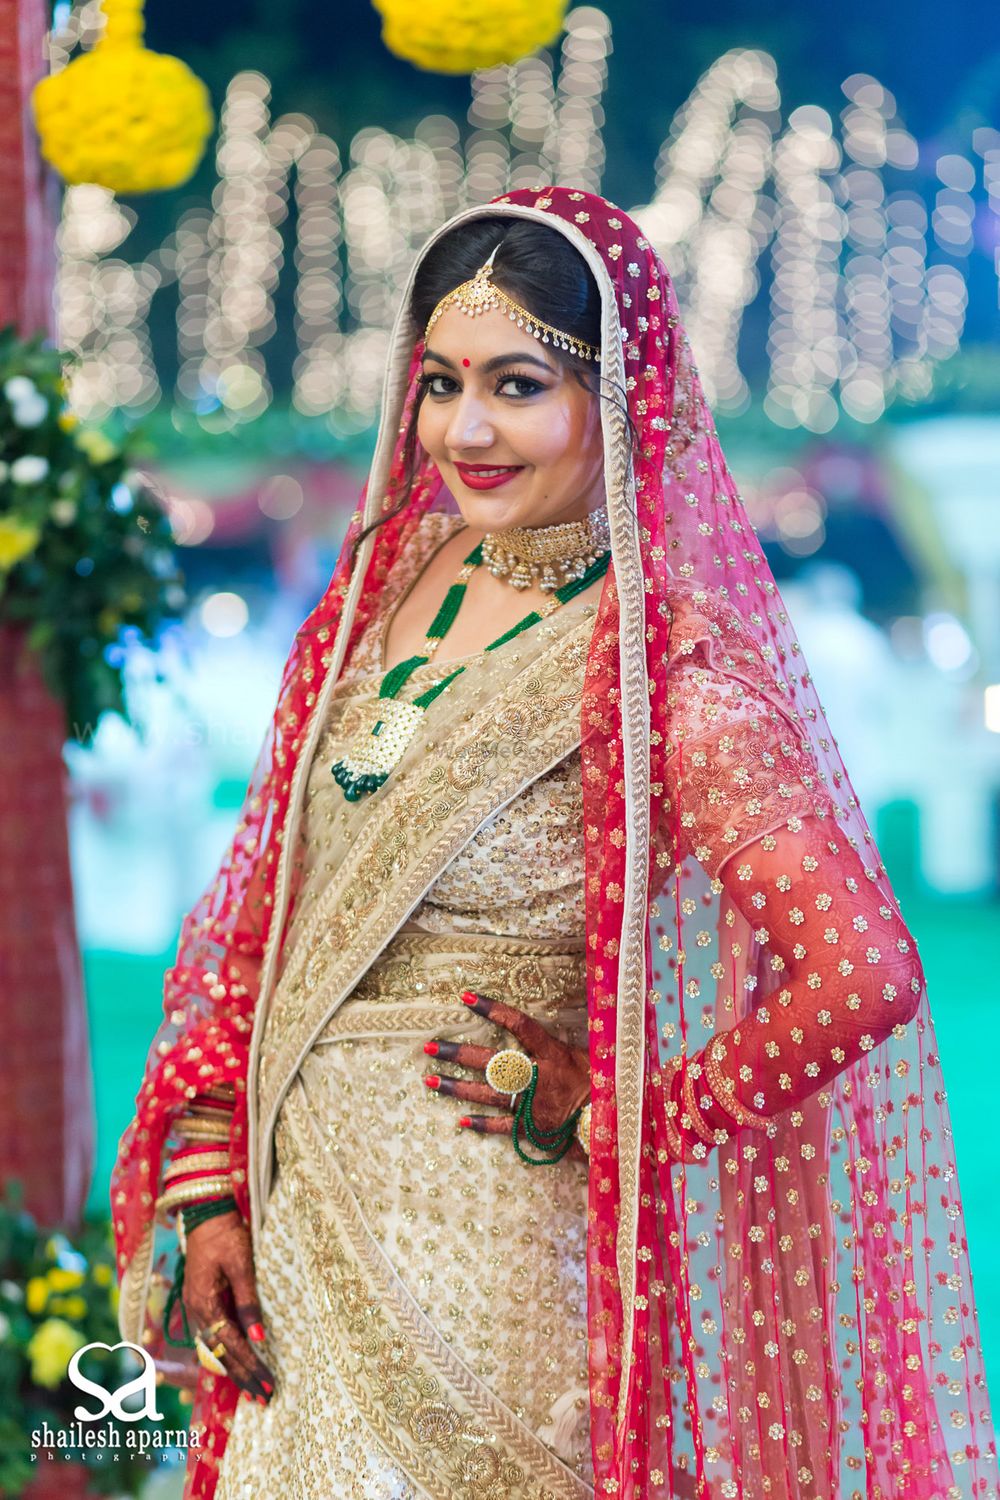 Photo of Bride Wearing Gold and White and Bridal Saree with Red